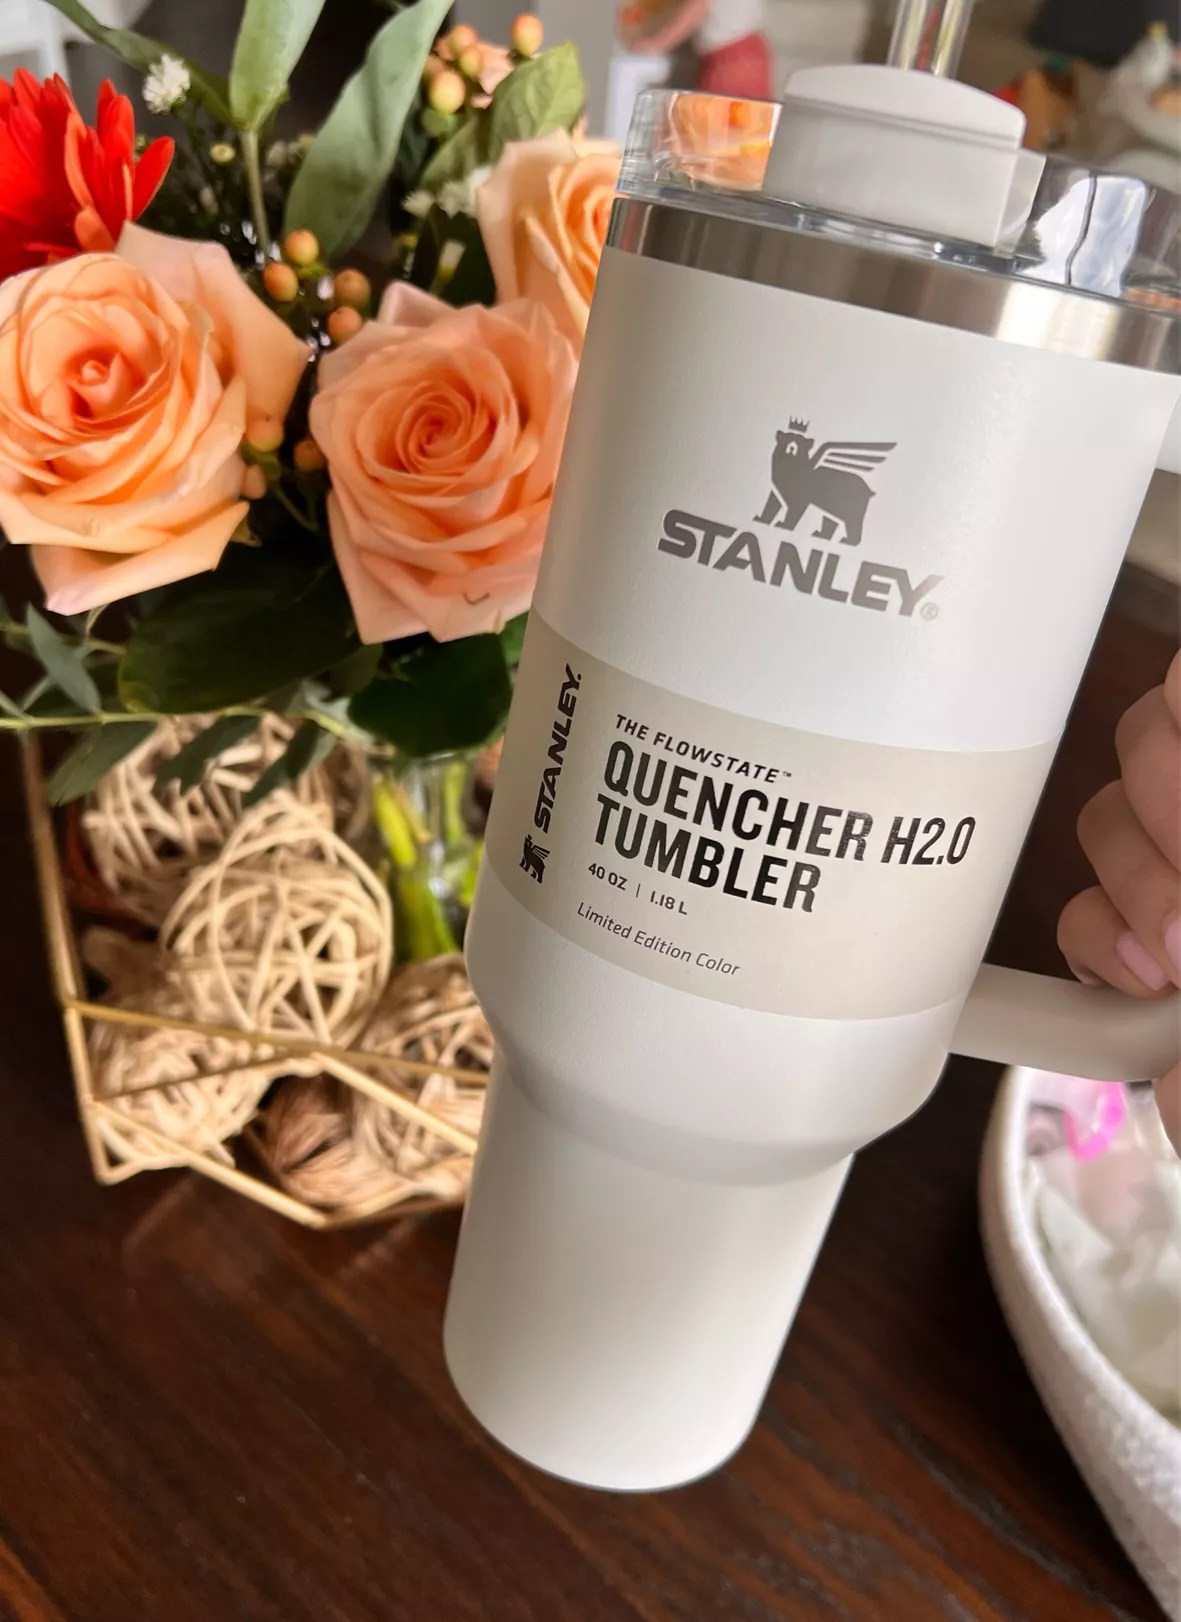 Stanley Adventure Quencher H2.0 Flowstate 40oz Stainless Steel  Tumbler-Brilliant White